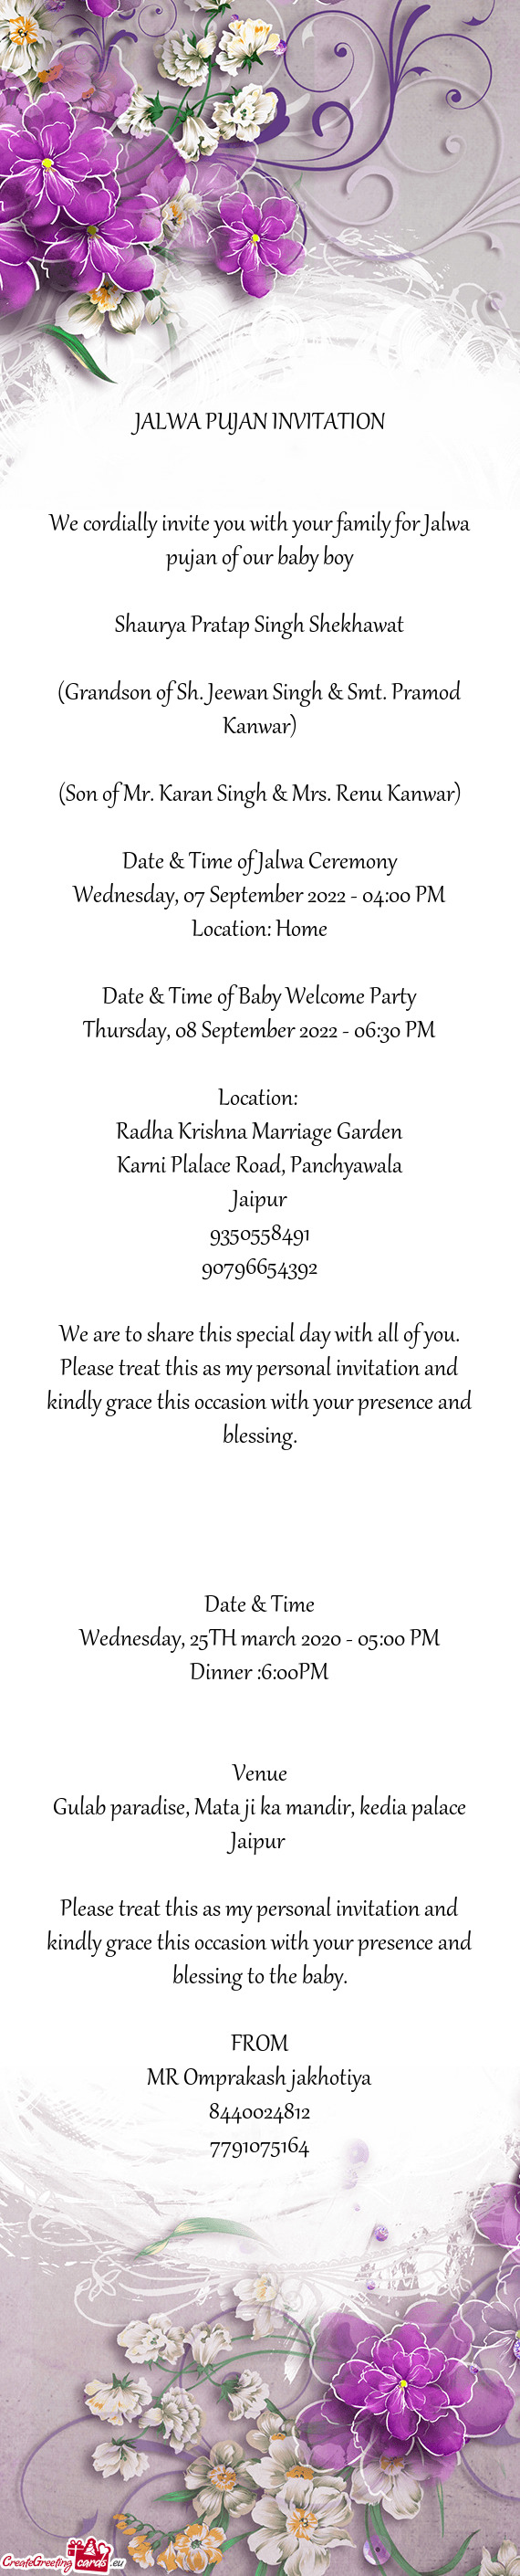 We cordially invite you with your family for Jalwa pujan of our baby boy